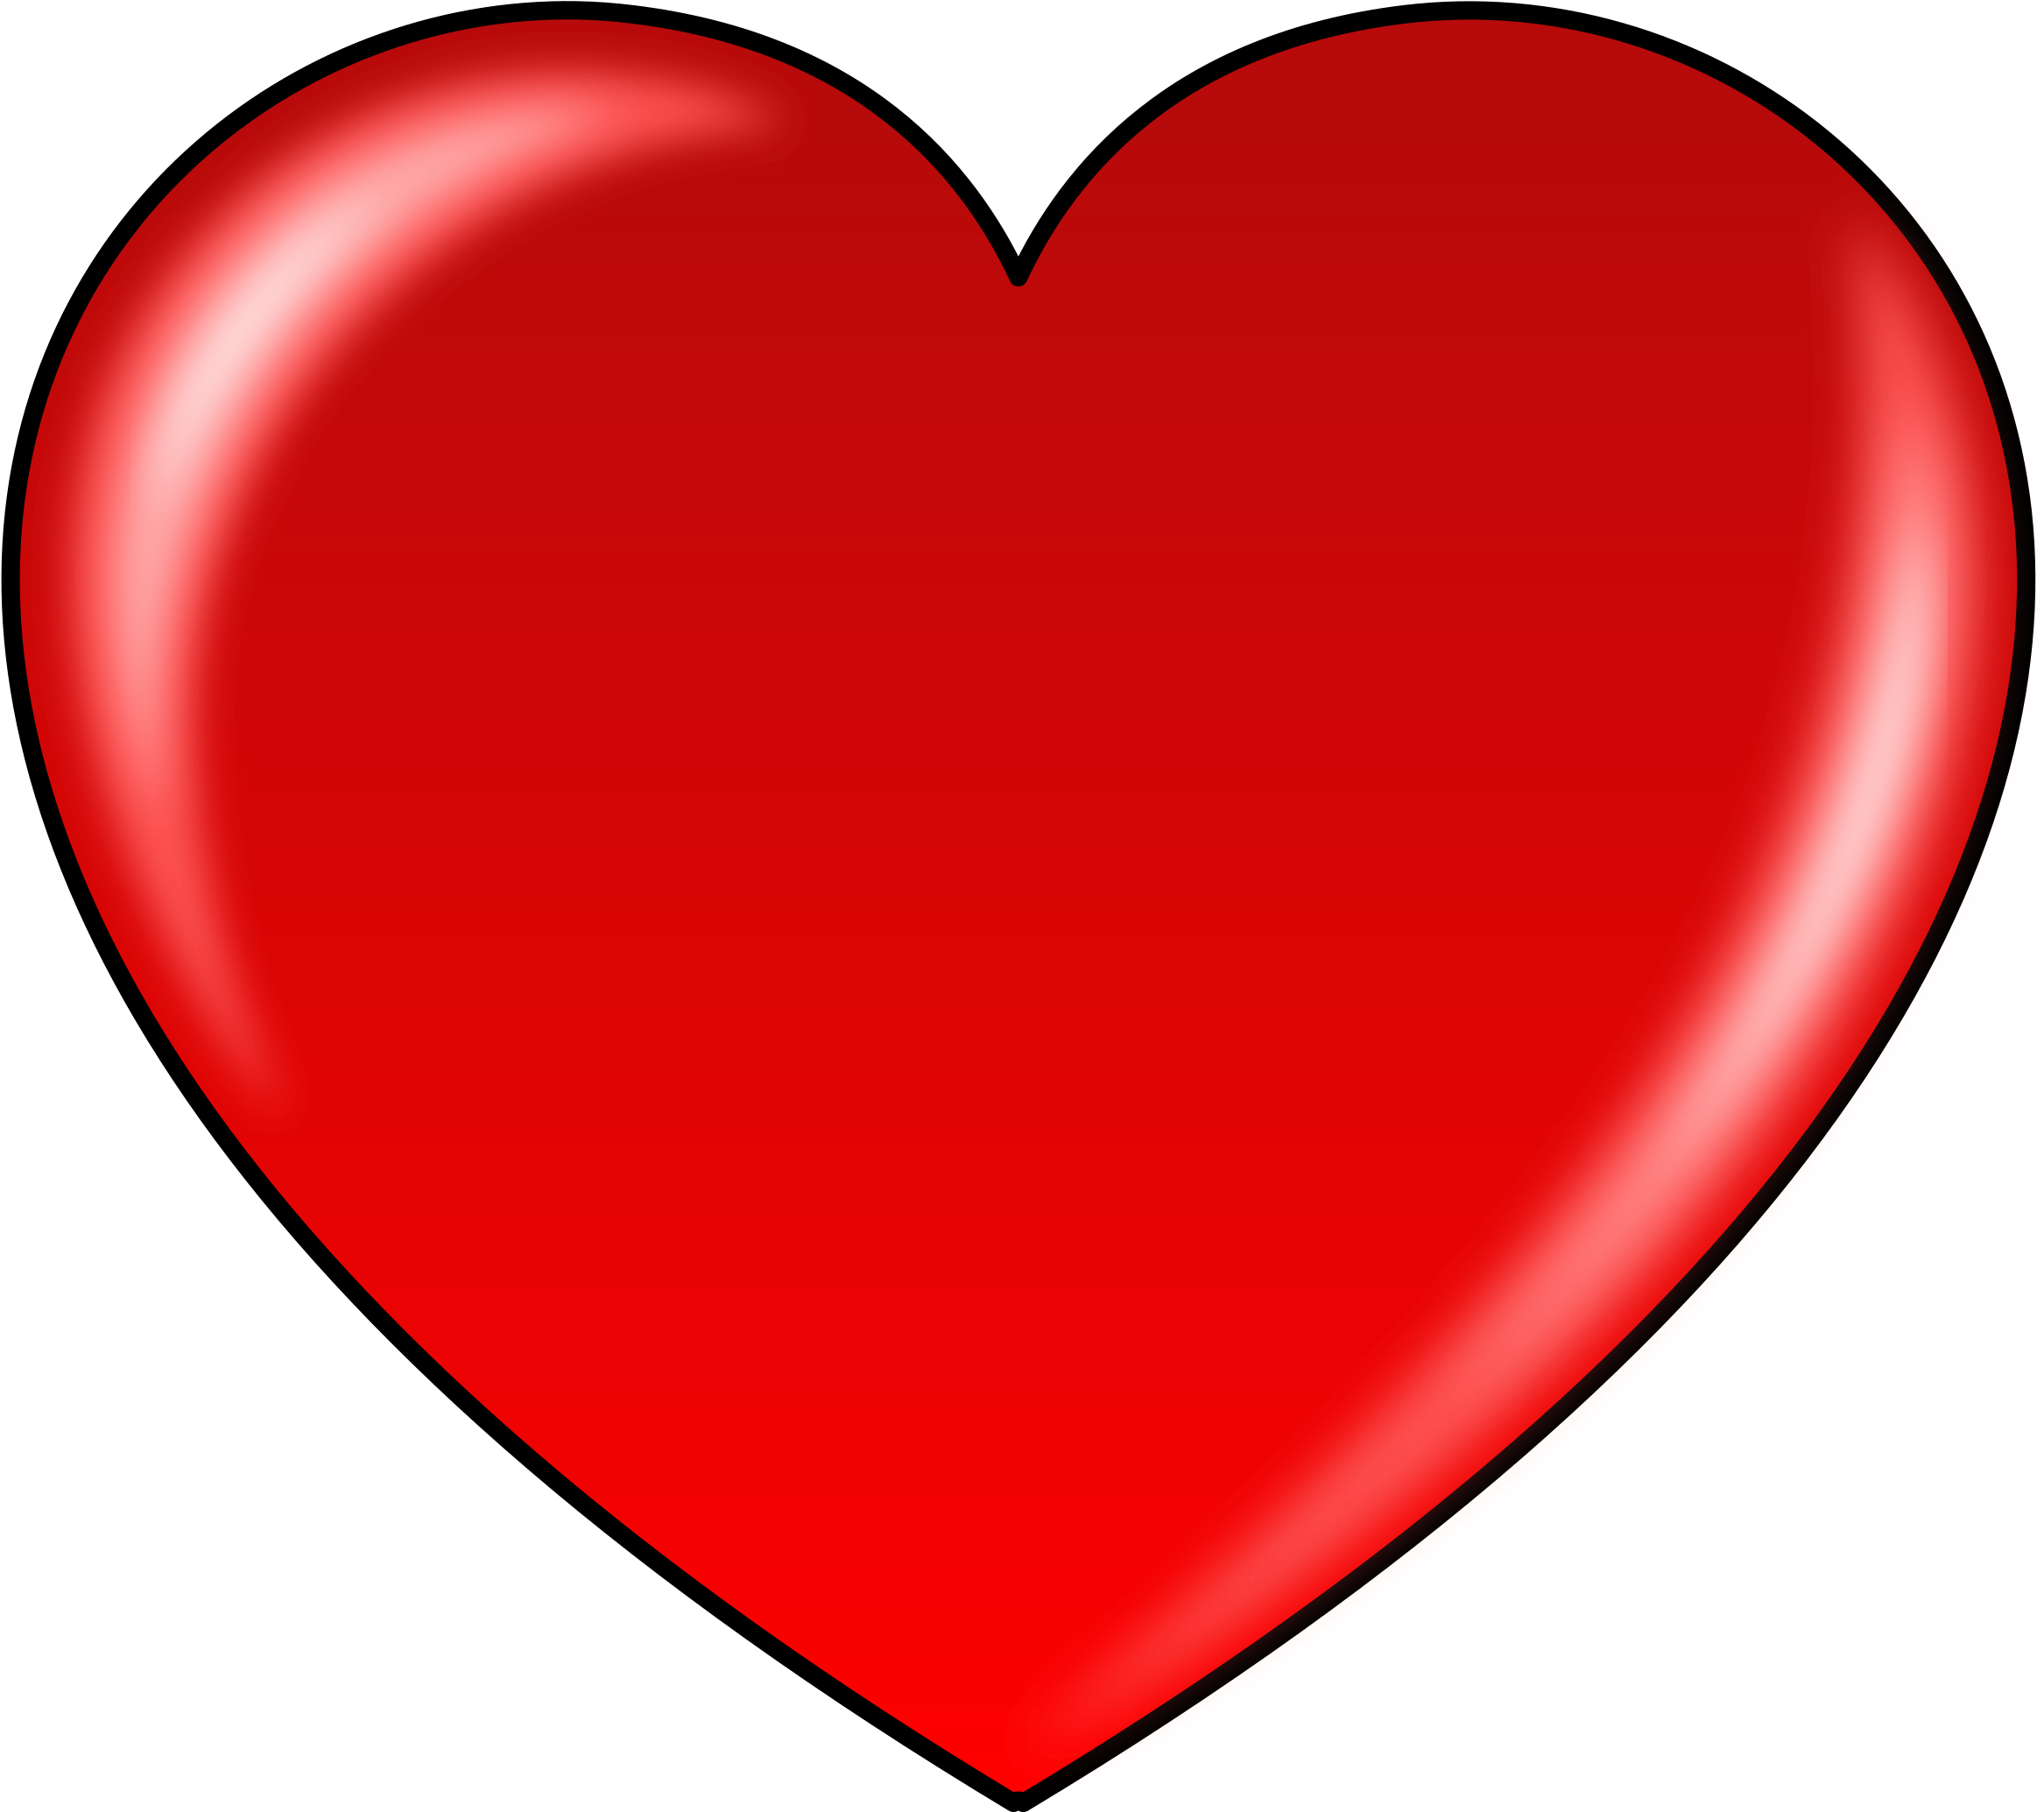 212 2126081 Clipart Myheart Png Coracao Png Red Cartoon Love 